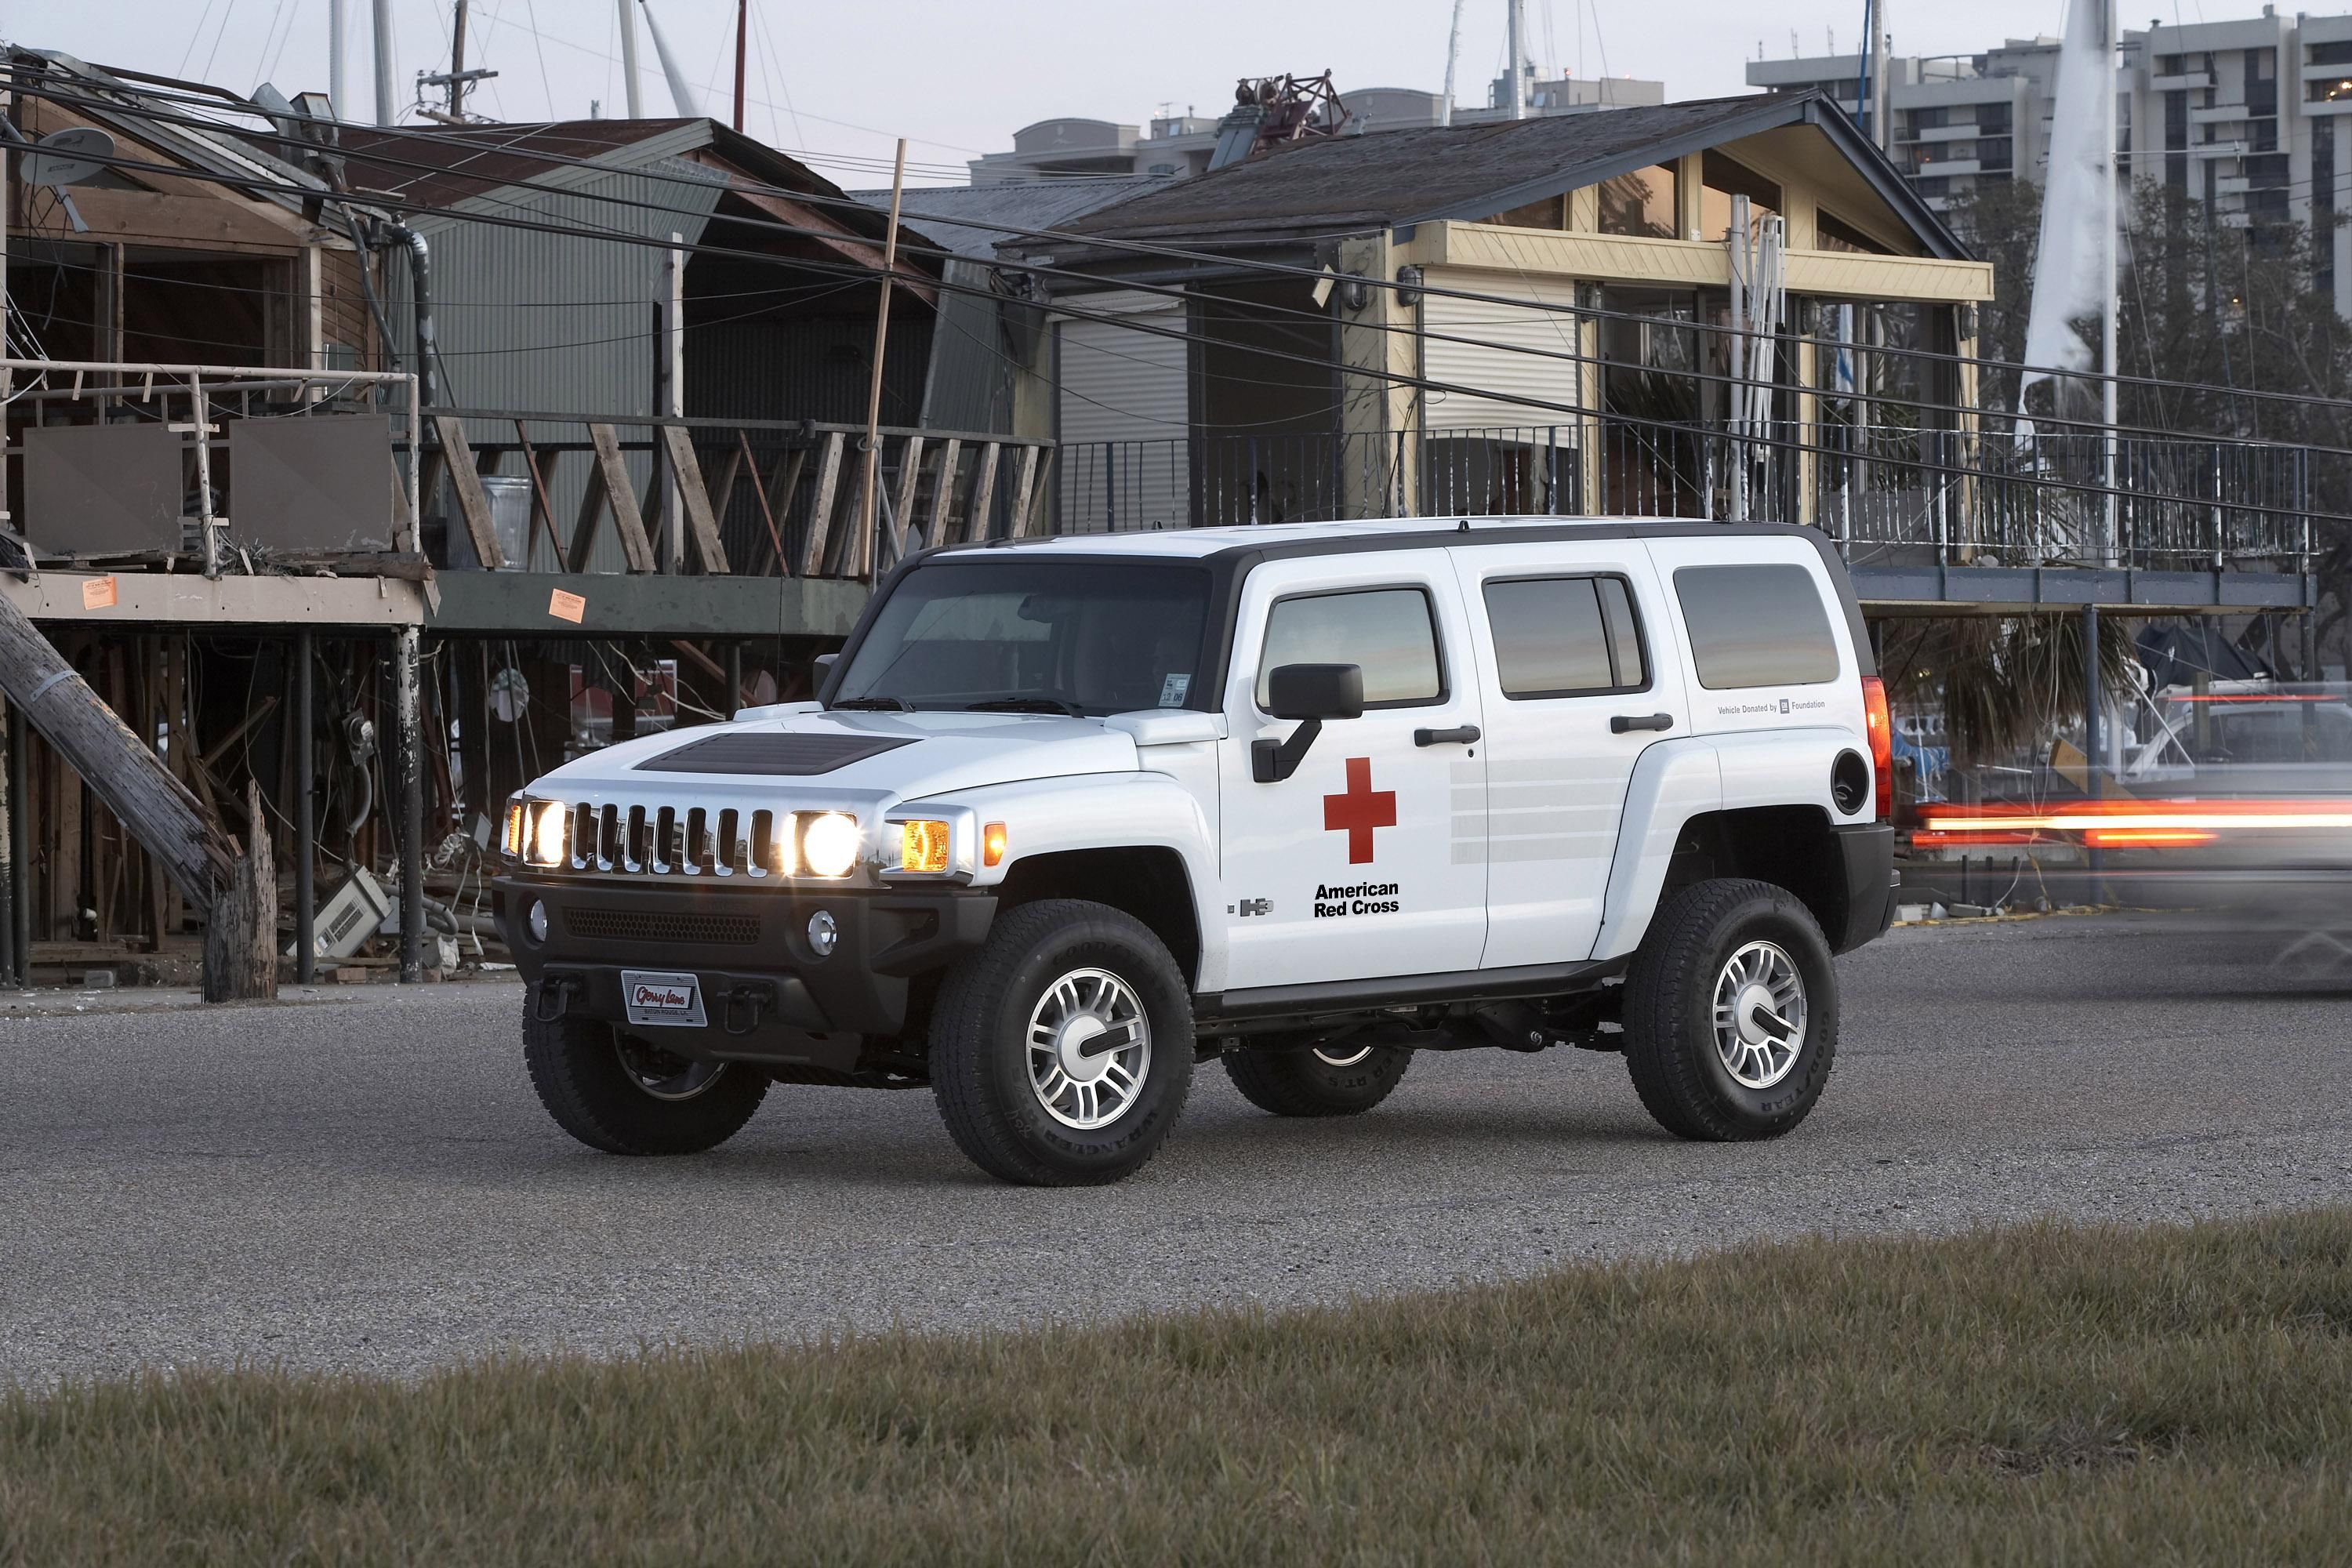 2007  HUMMER H3 Red Cross Edition